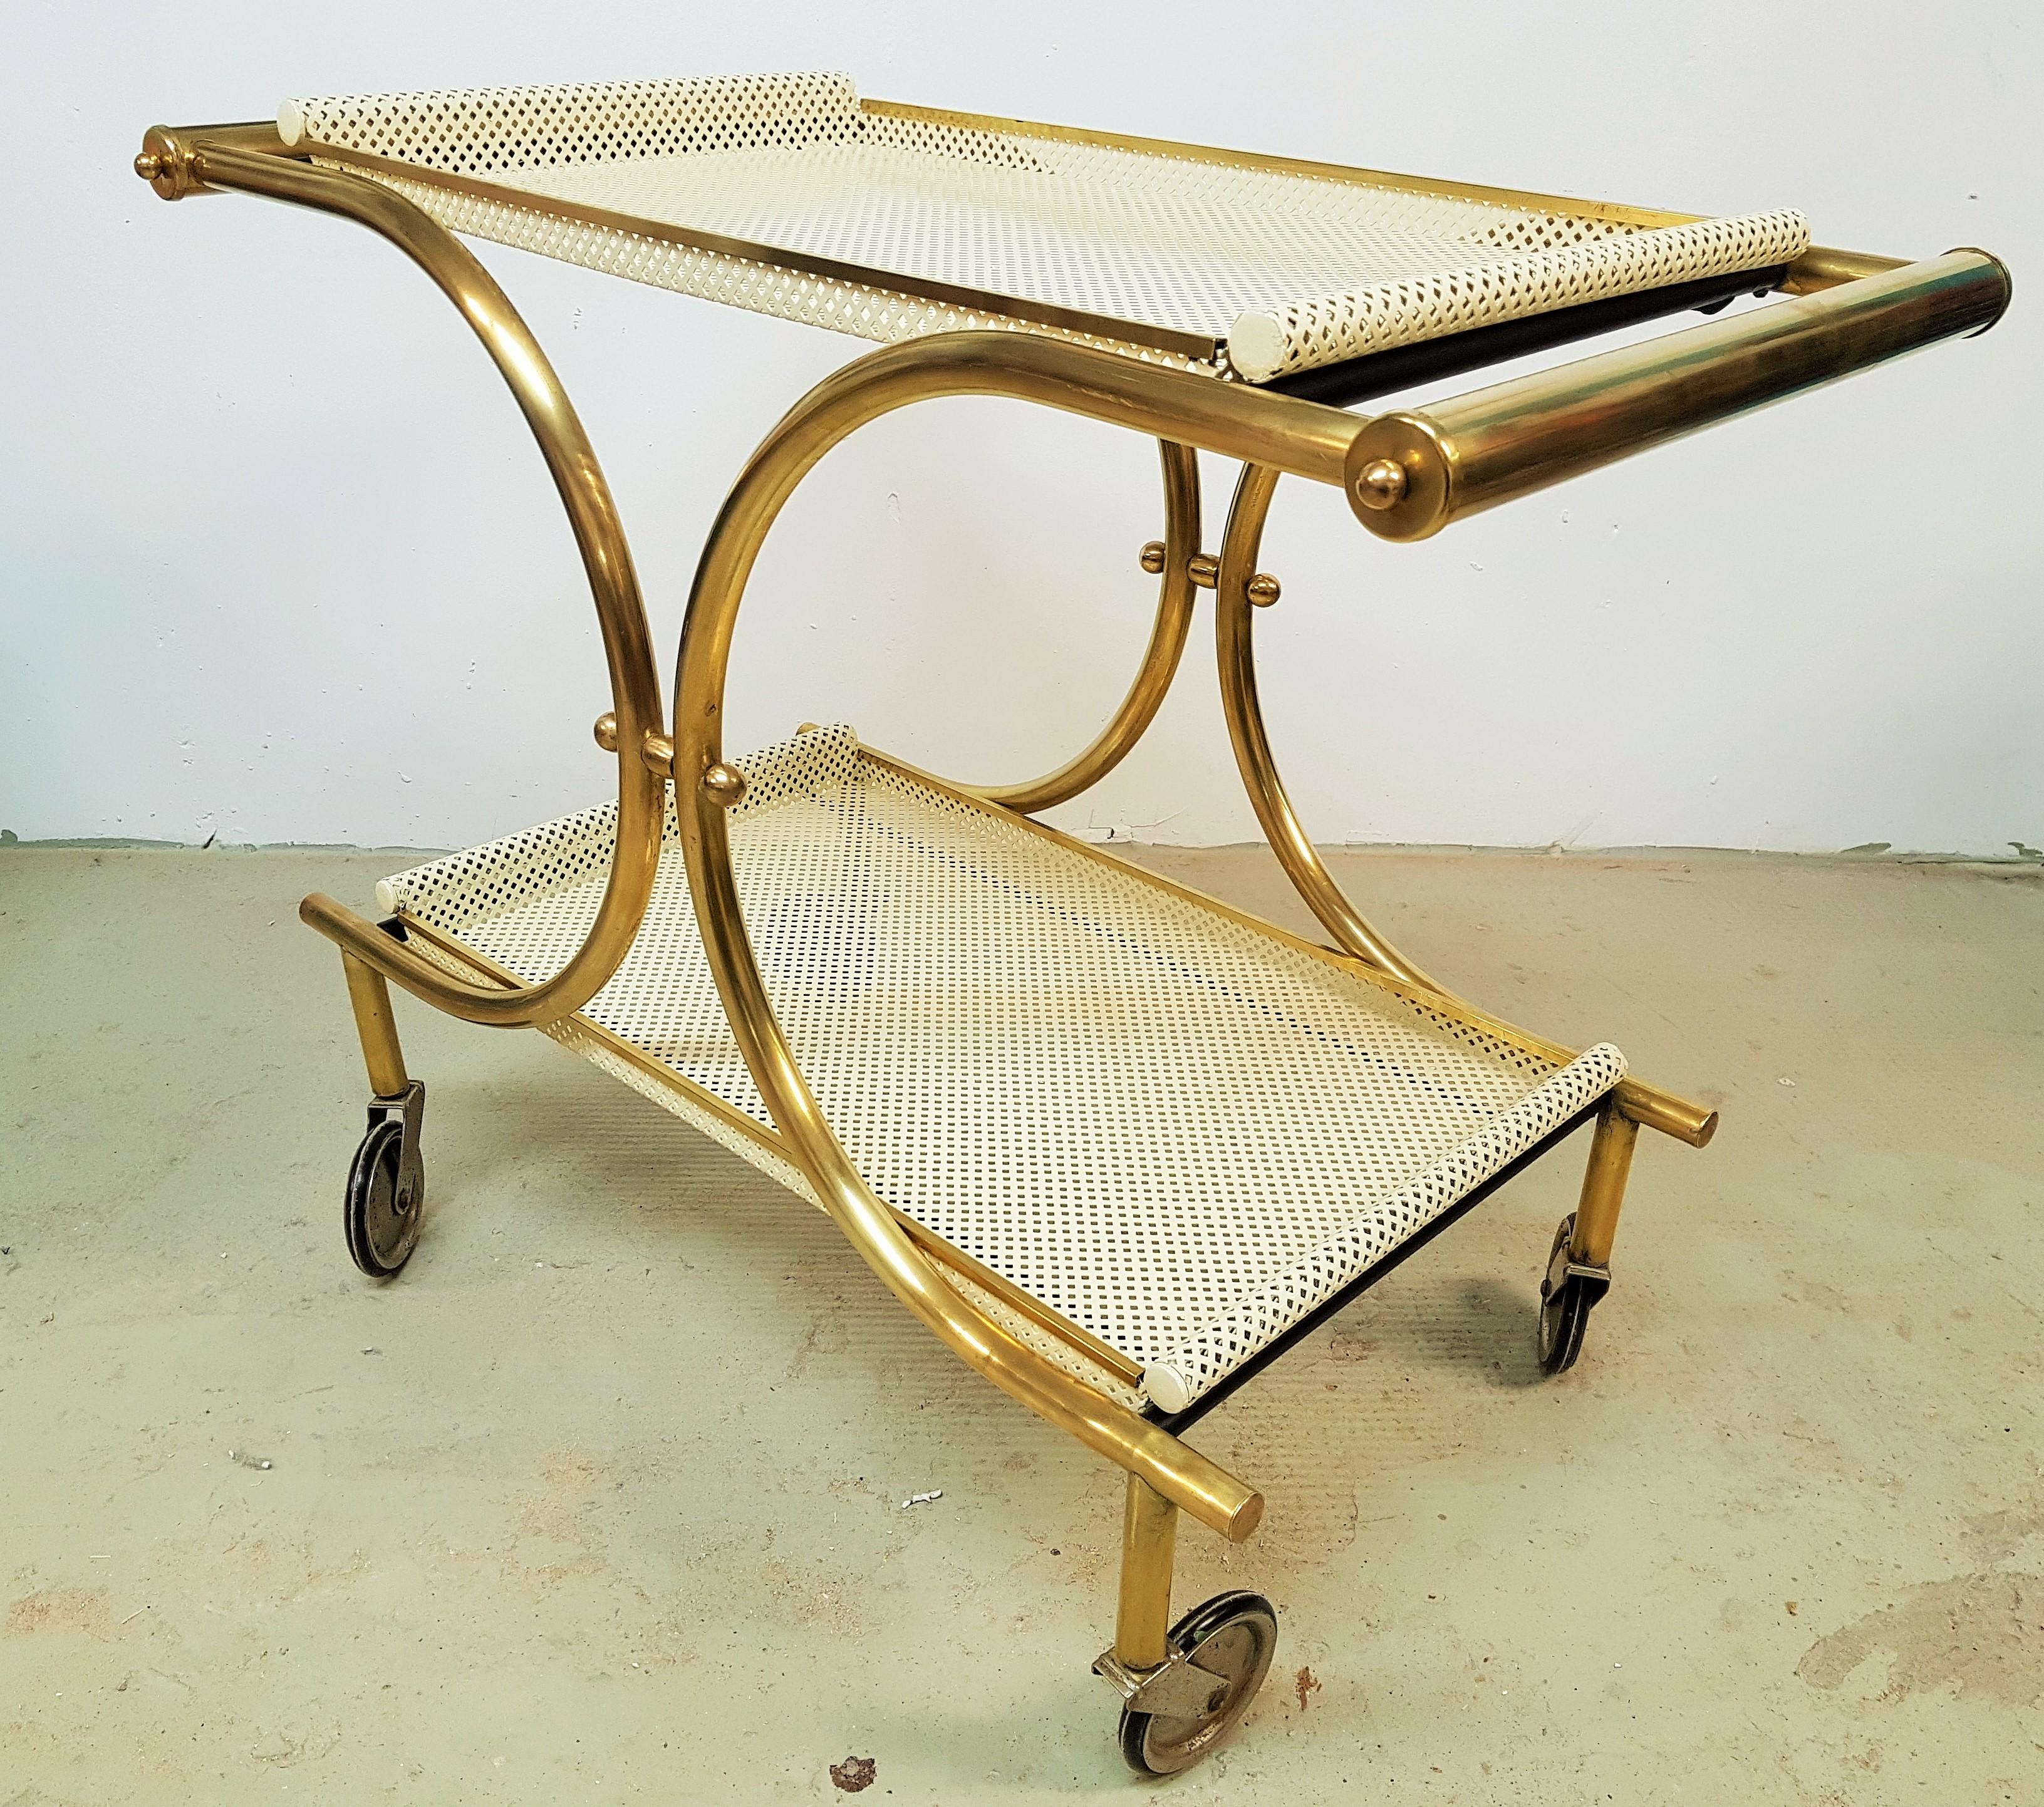 Art Deco midcentury Matégot style Art Deco bar cart 1940s, brass and ivory lacquer. Very good vintage condition. Castors work perfectly.